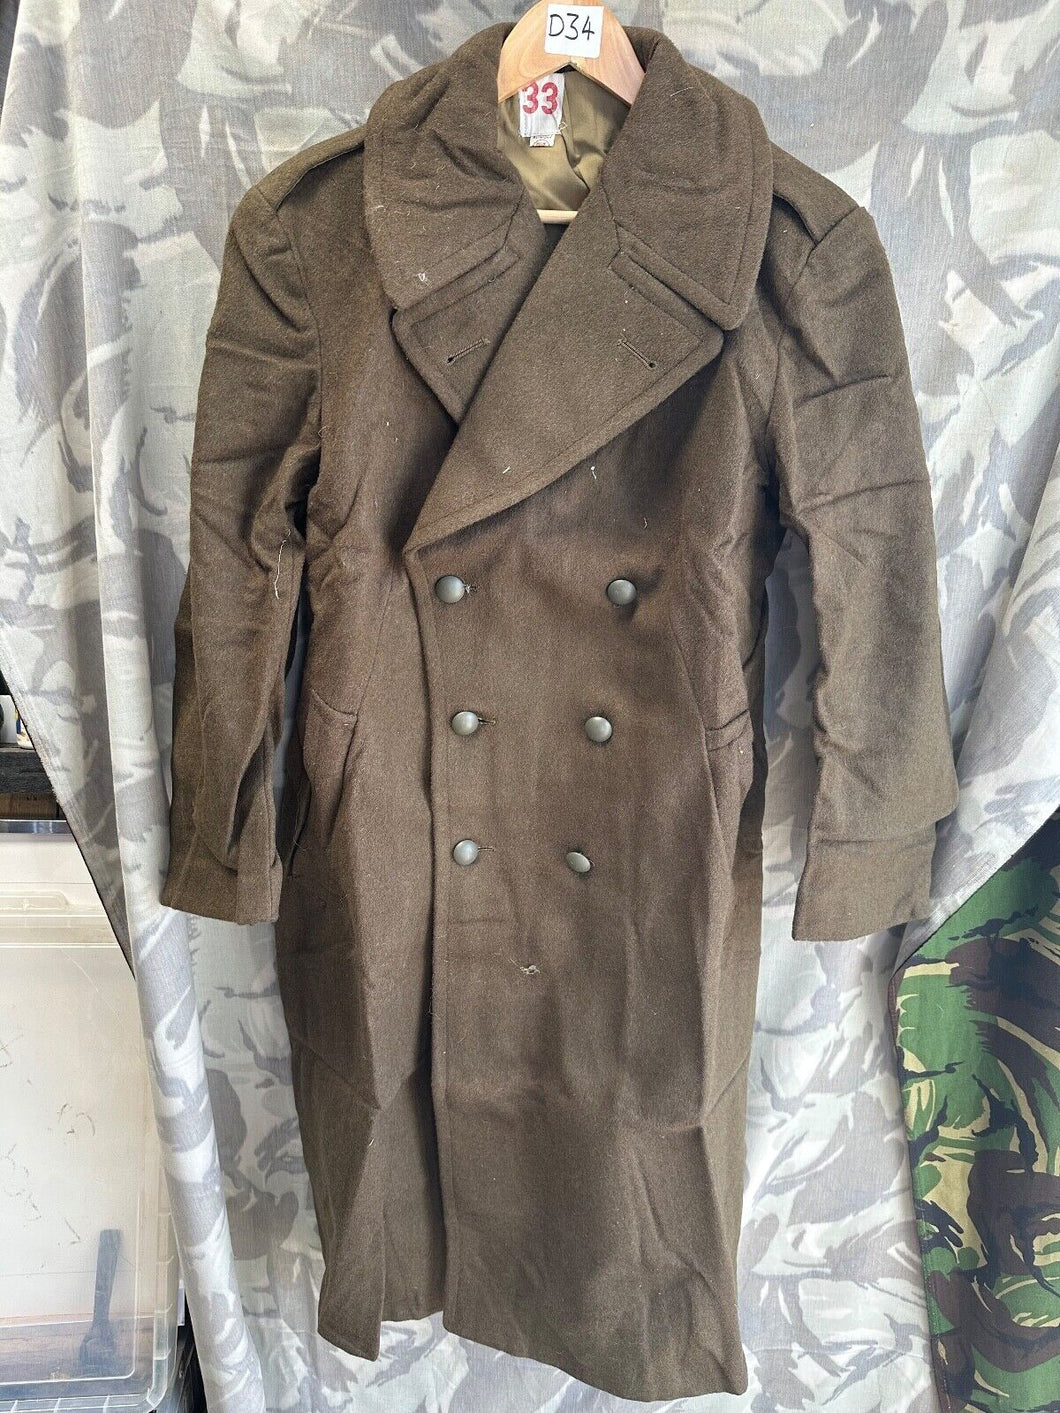 Genuine French Army Greatcoat - Ideal for WW2 US Army Reenactment